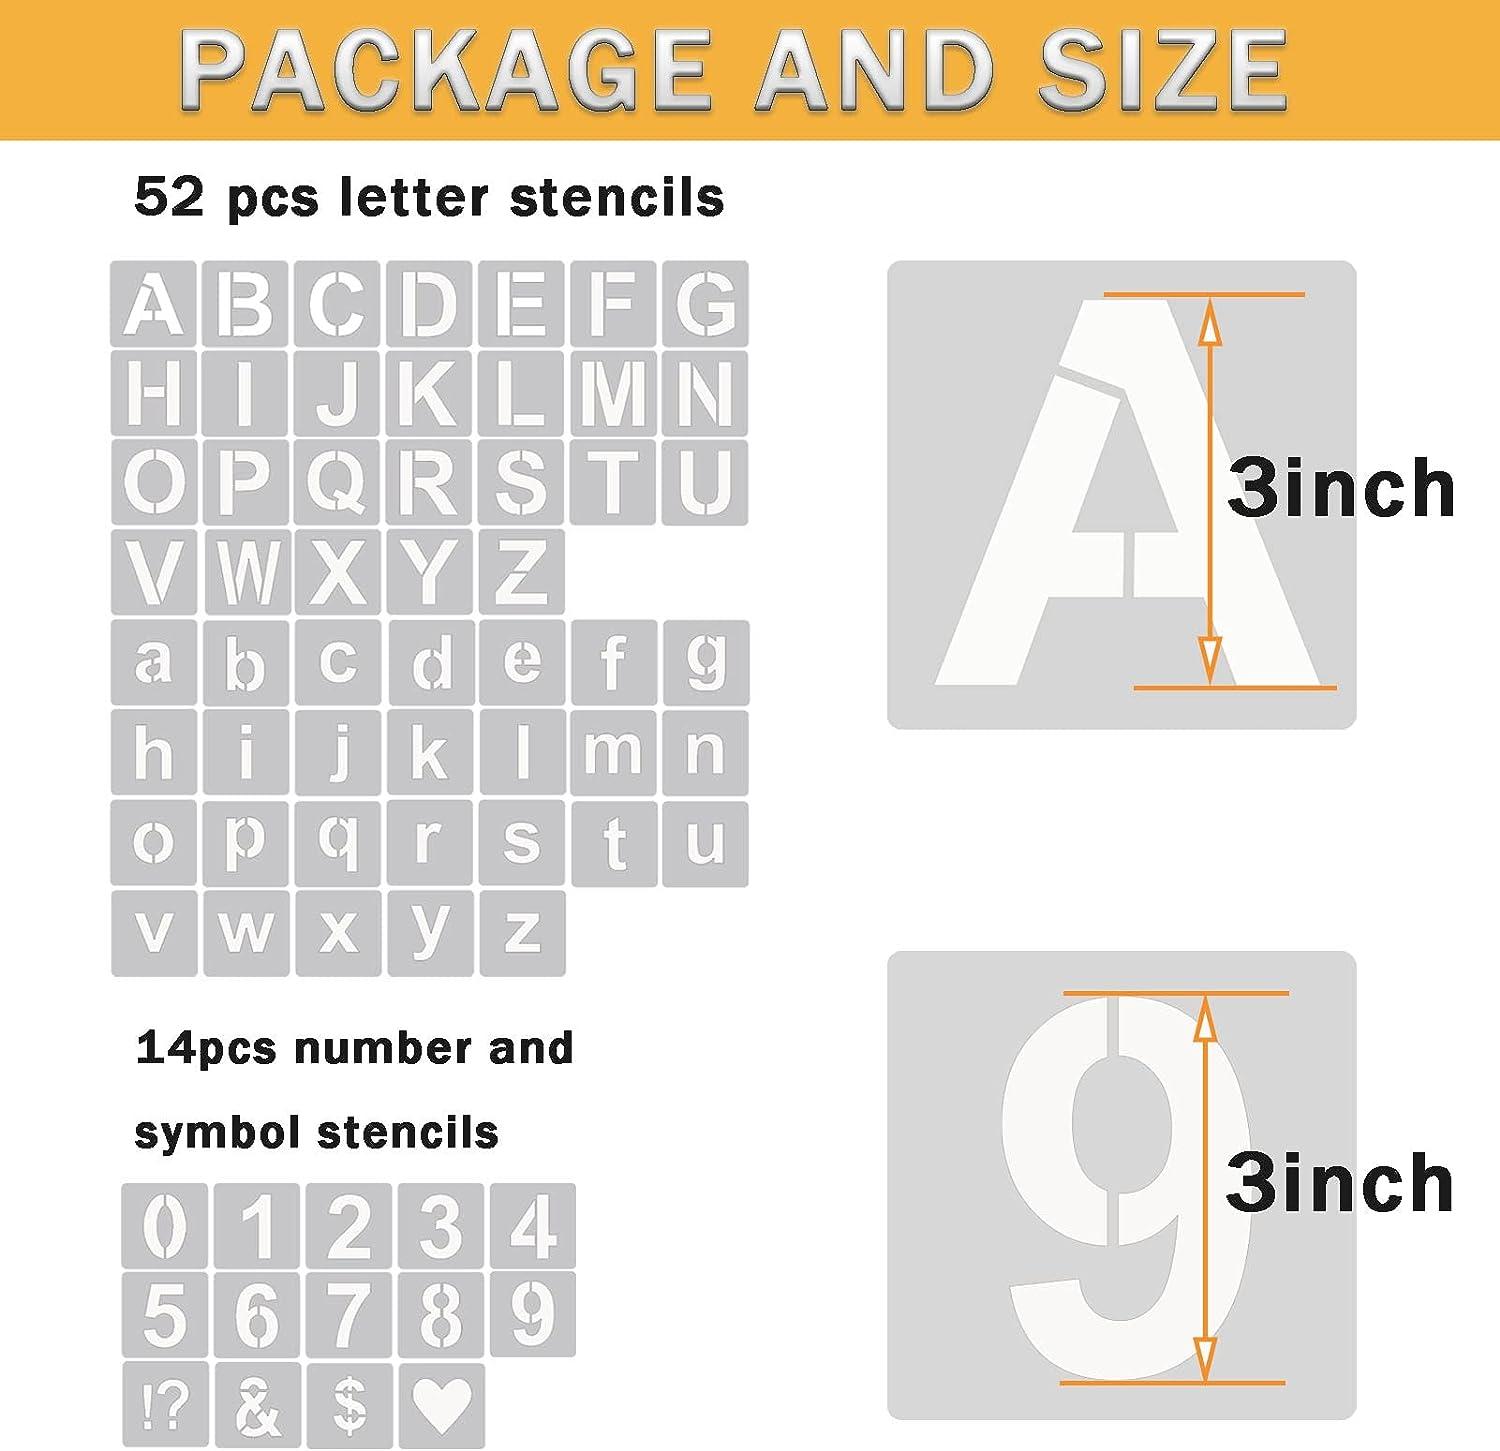 YEAJON 3 Inch Letter Stencils Symbol Numbers Craft Stencils, 66 Pcs  Reusable Plastic Alphabet Templates for Painting on Wood, Wall, Fabric,  Rock, Glass, Chalkboard, Signage, DIY Art Projects